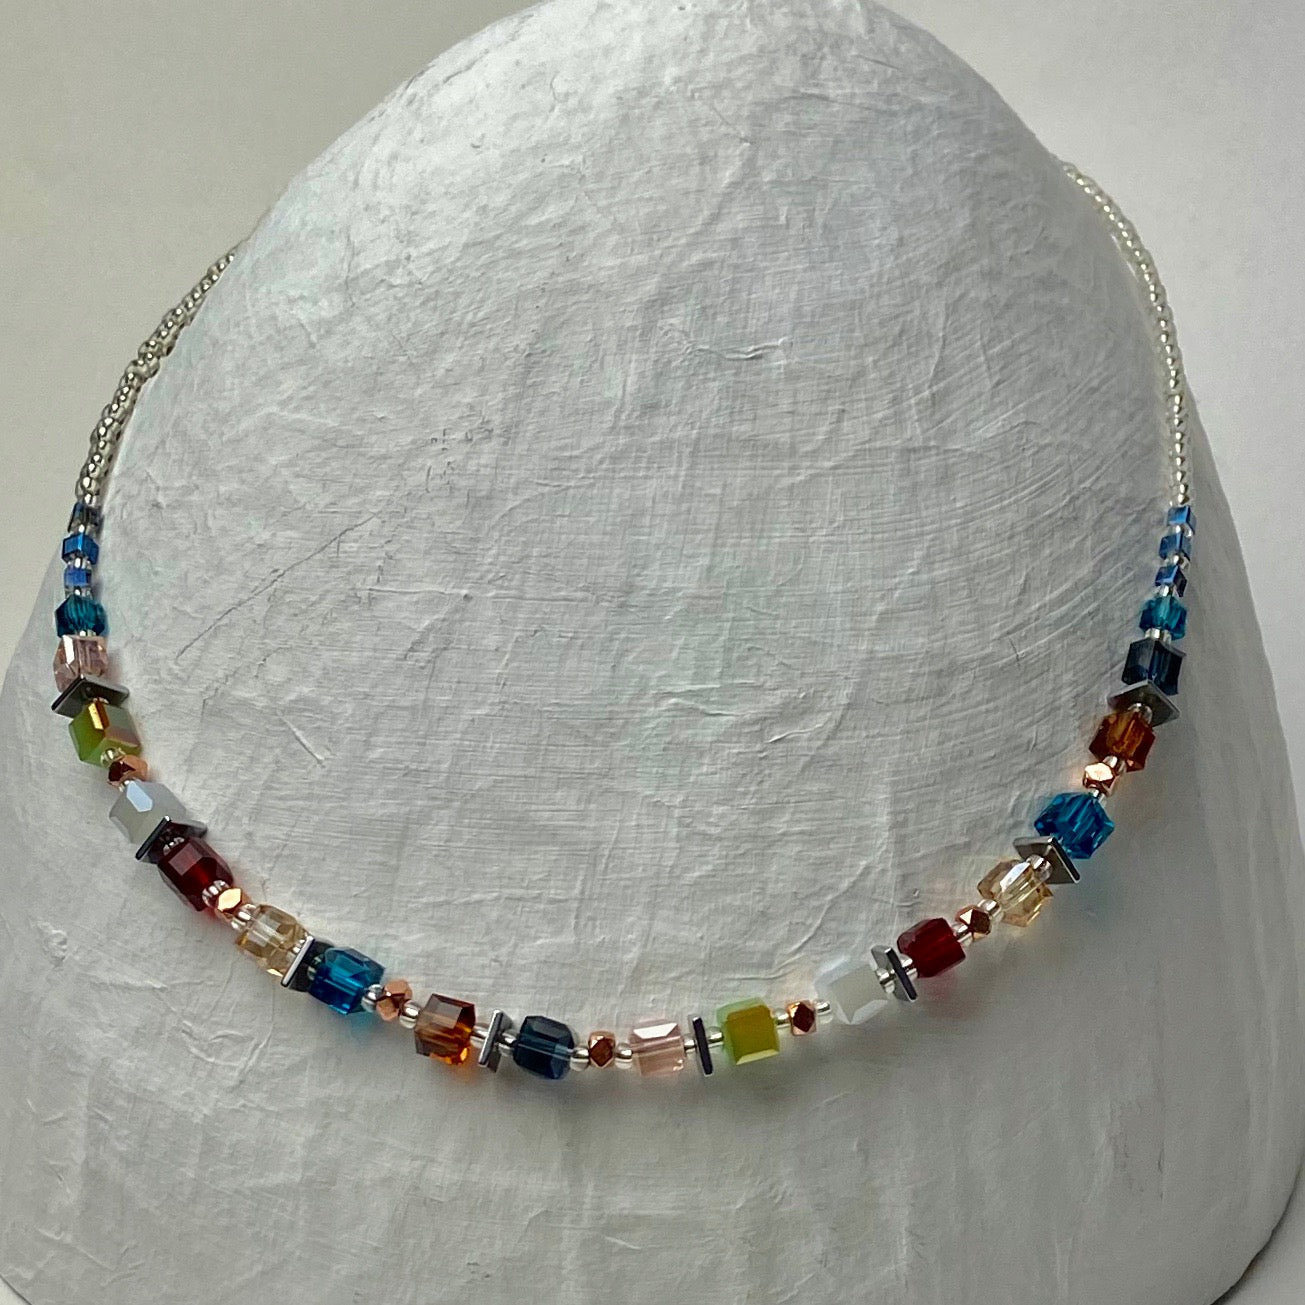 Bright Crystal Necklace - The Nancy Smillie Shop - Art, Jewellery & Designer Gifts Glasgow